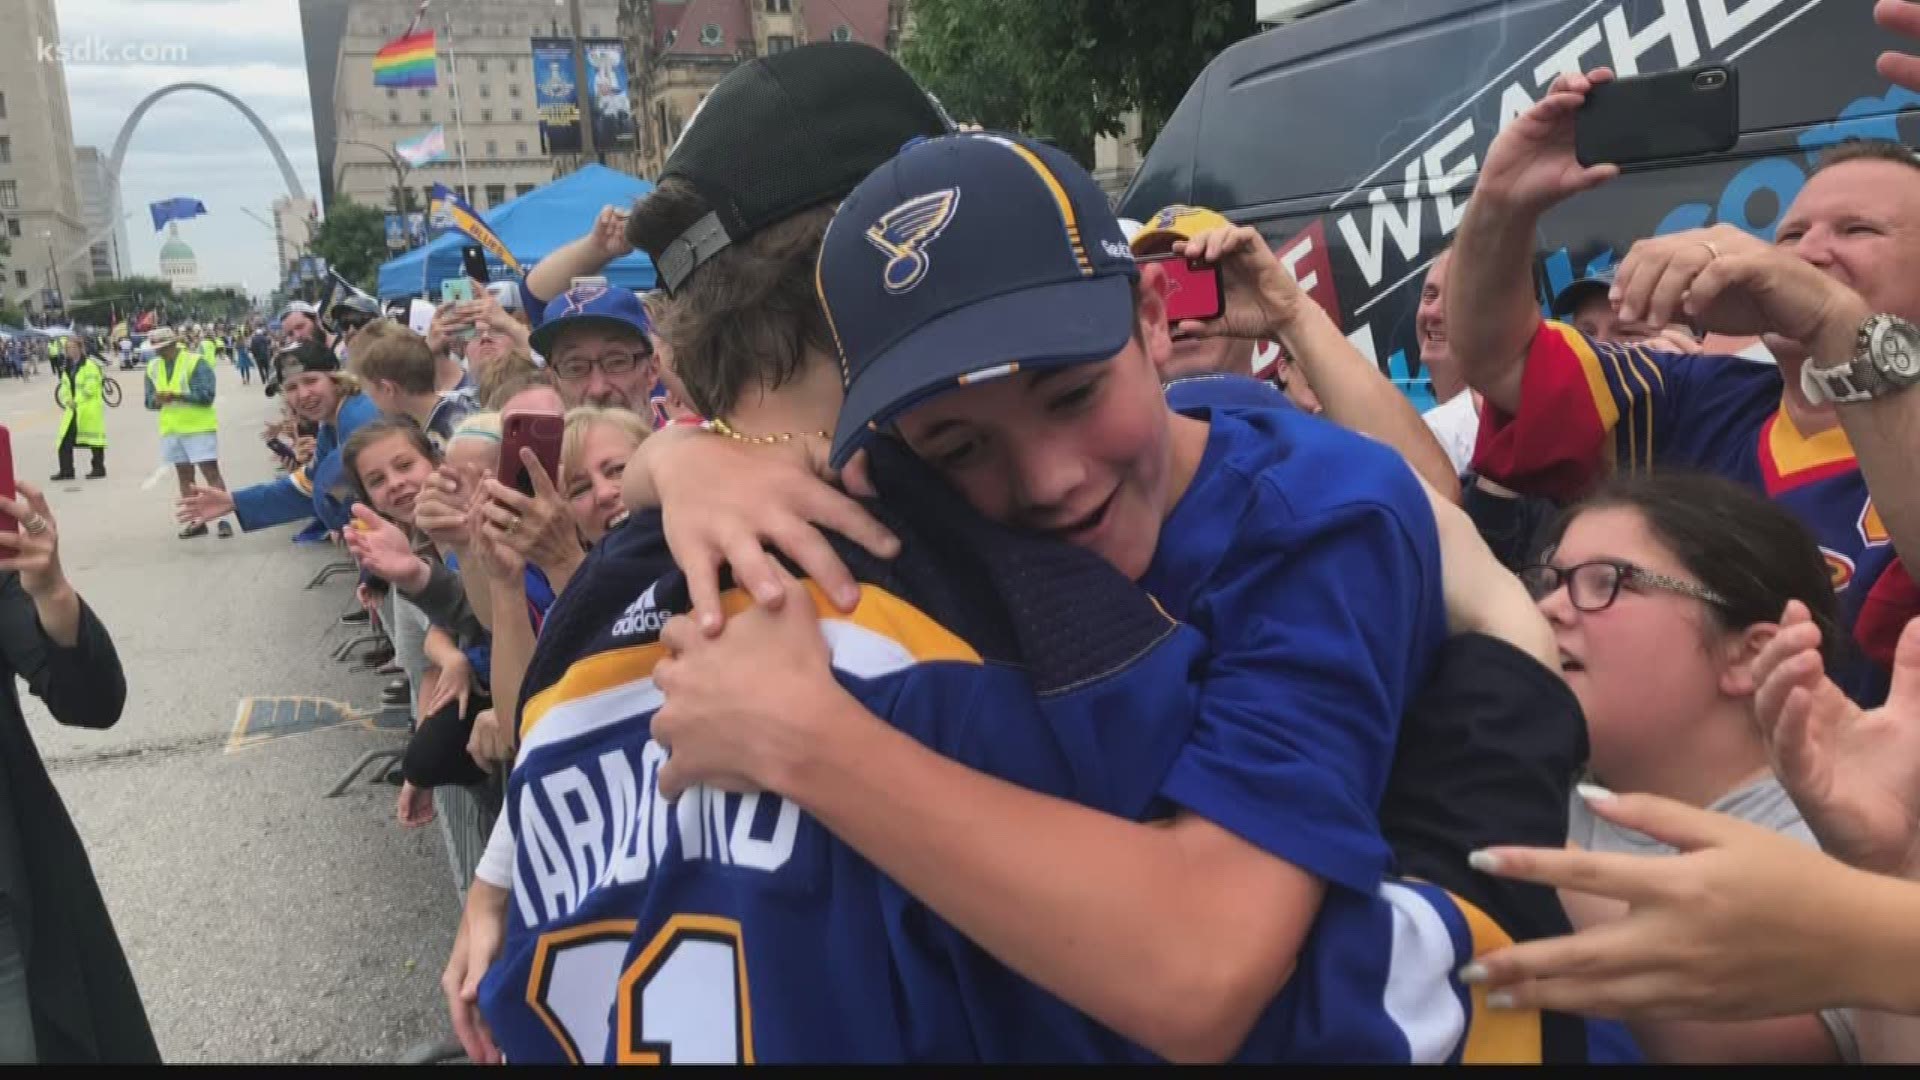 If you were at the Stanley Cup parade on Saturday, chances are it was hard to see -- the crowd was 40 people deep in some spots. Here's a look at all the highlights.